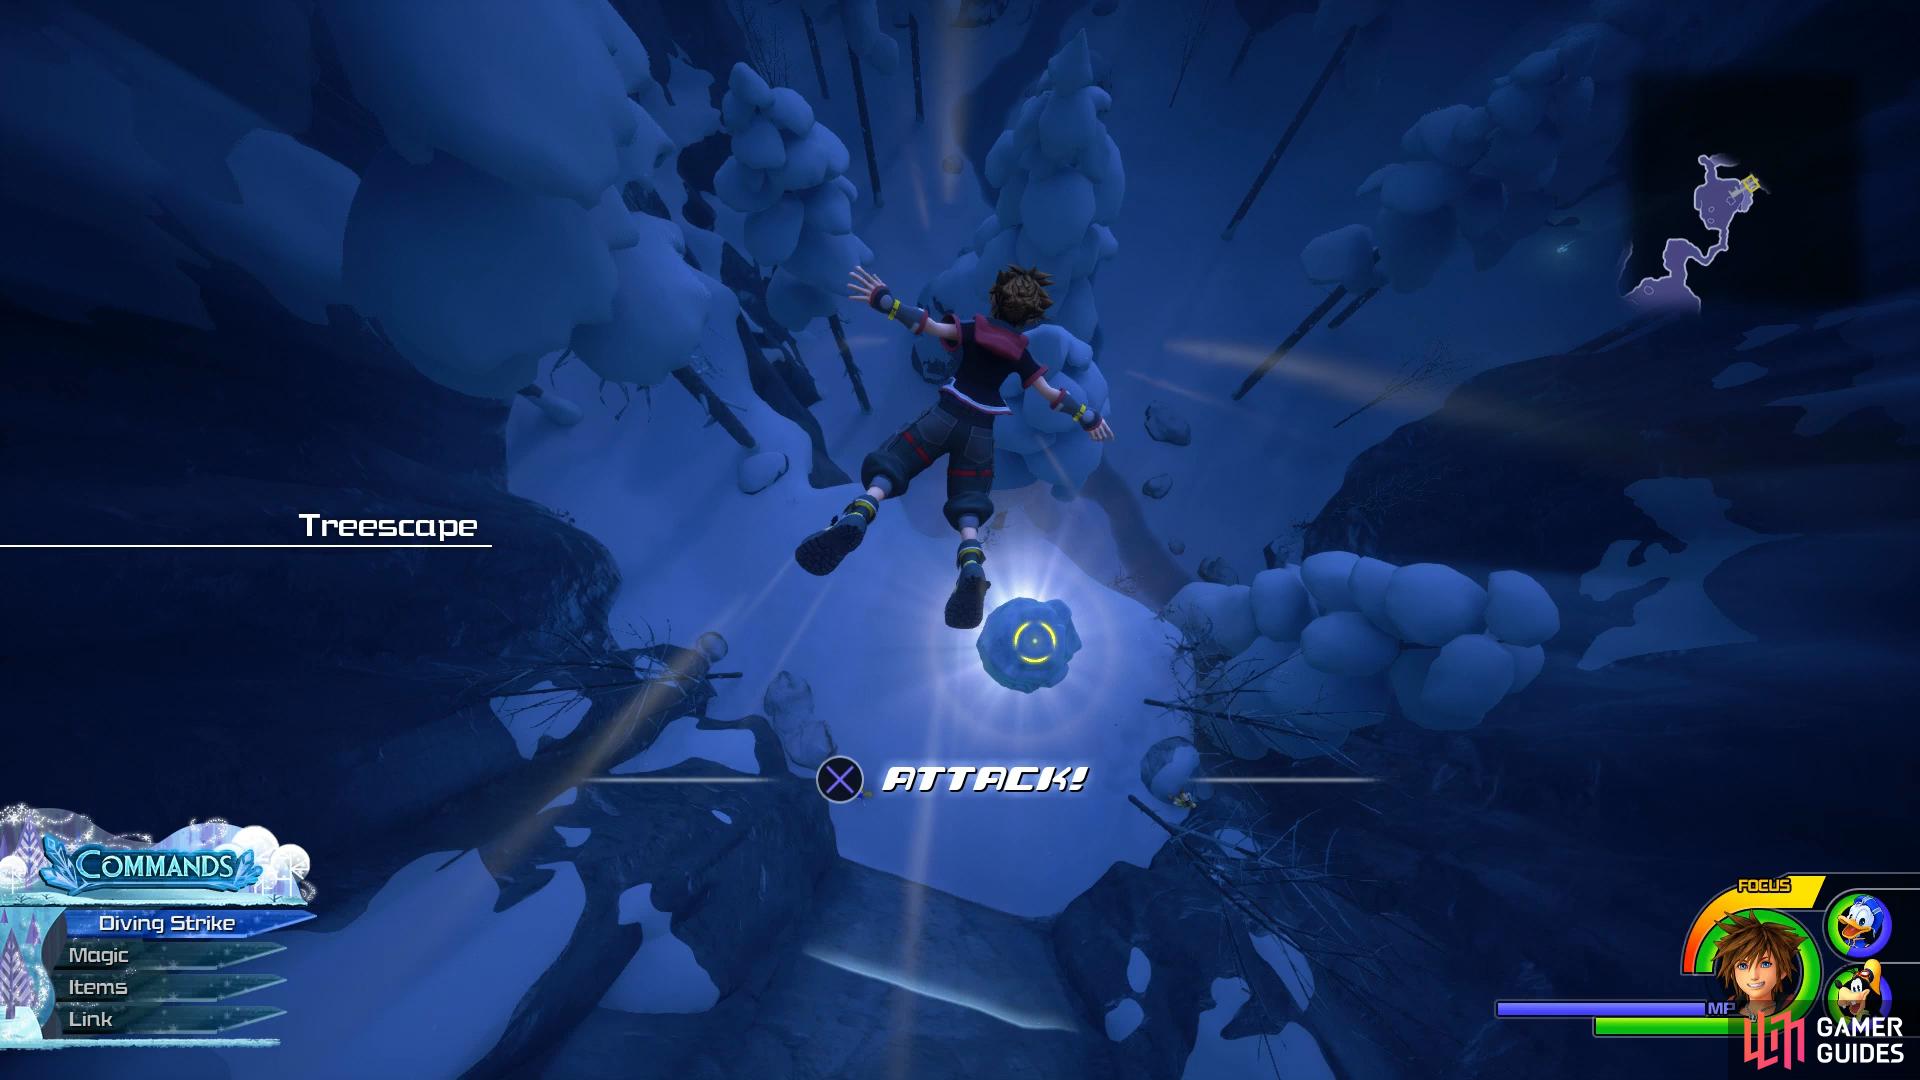 Strike the ice while falling to reveal the chest